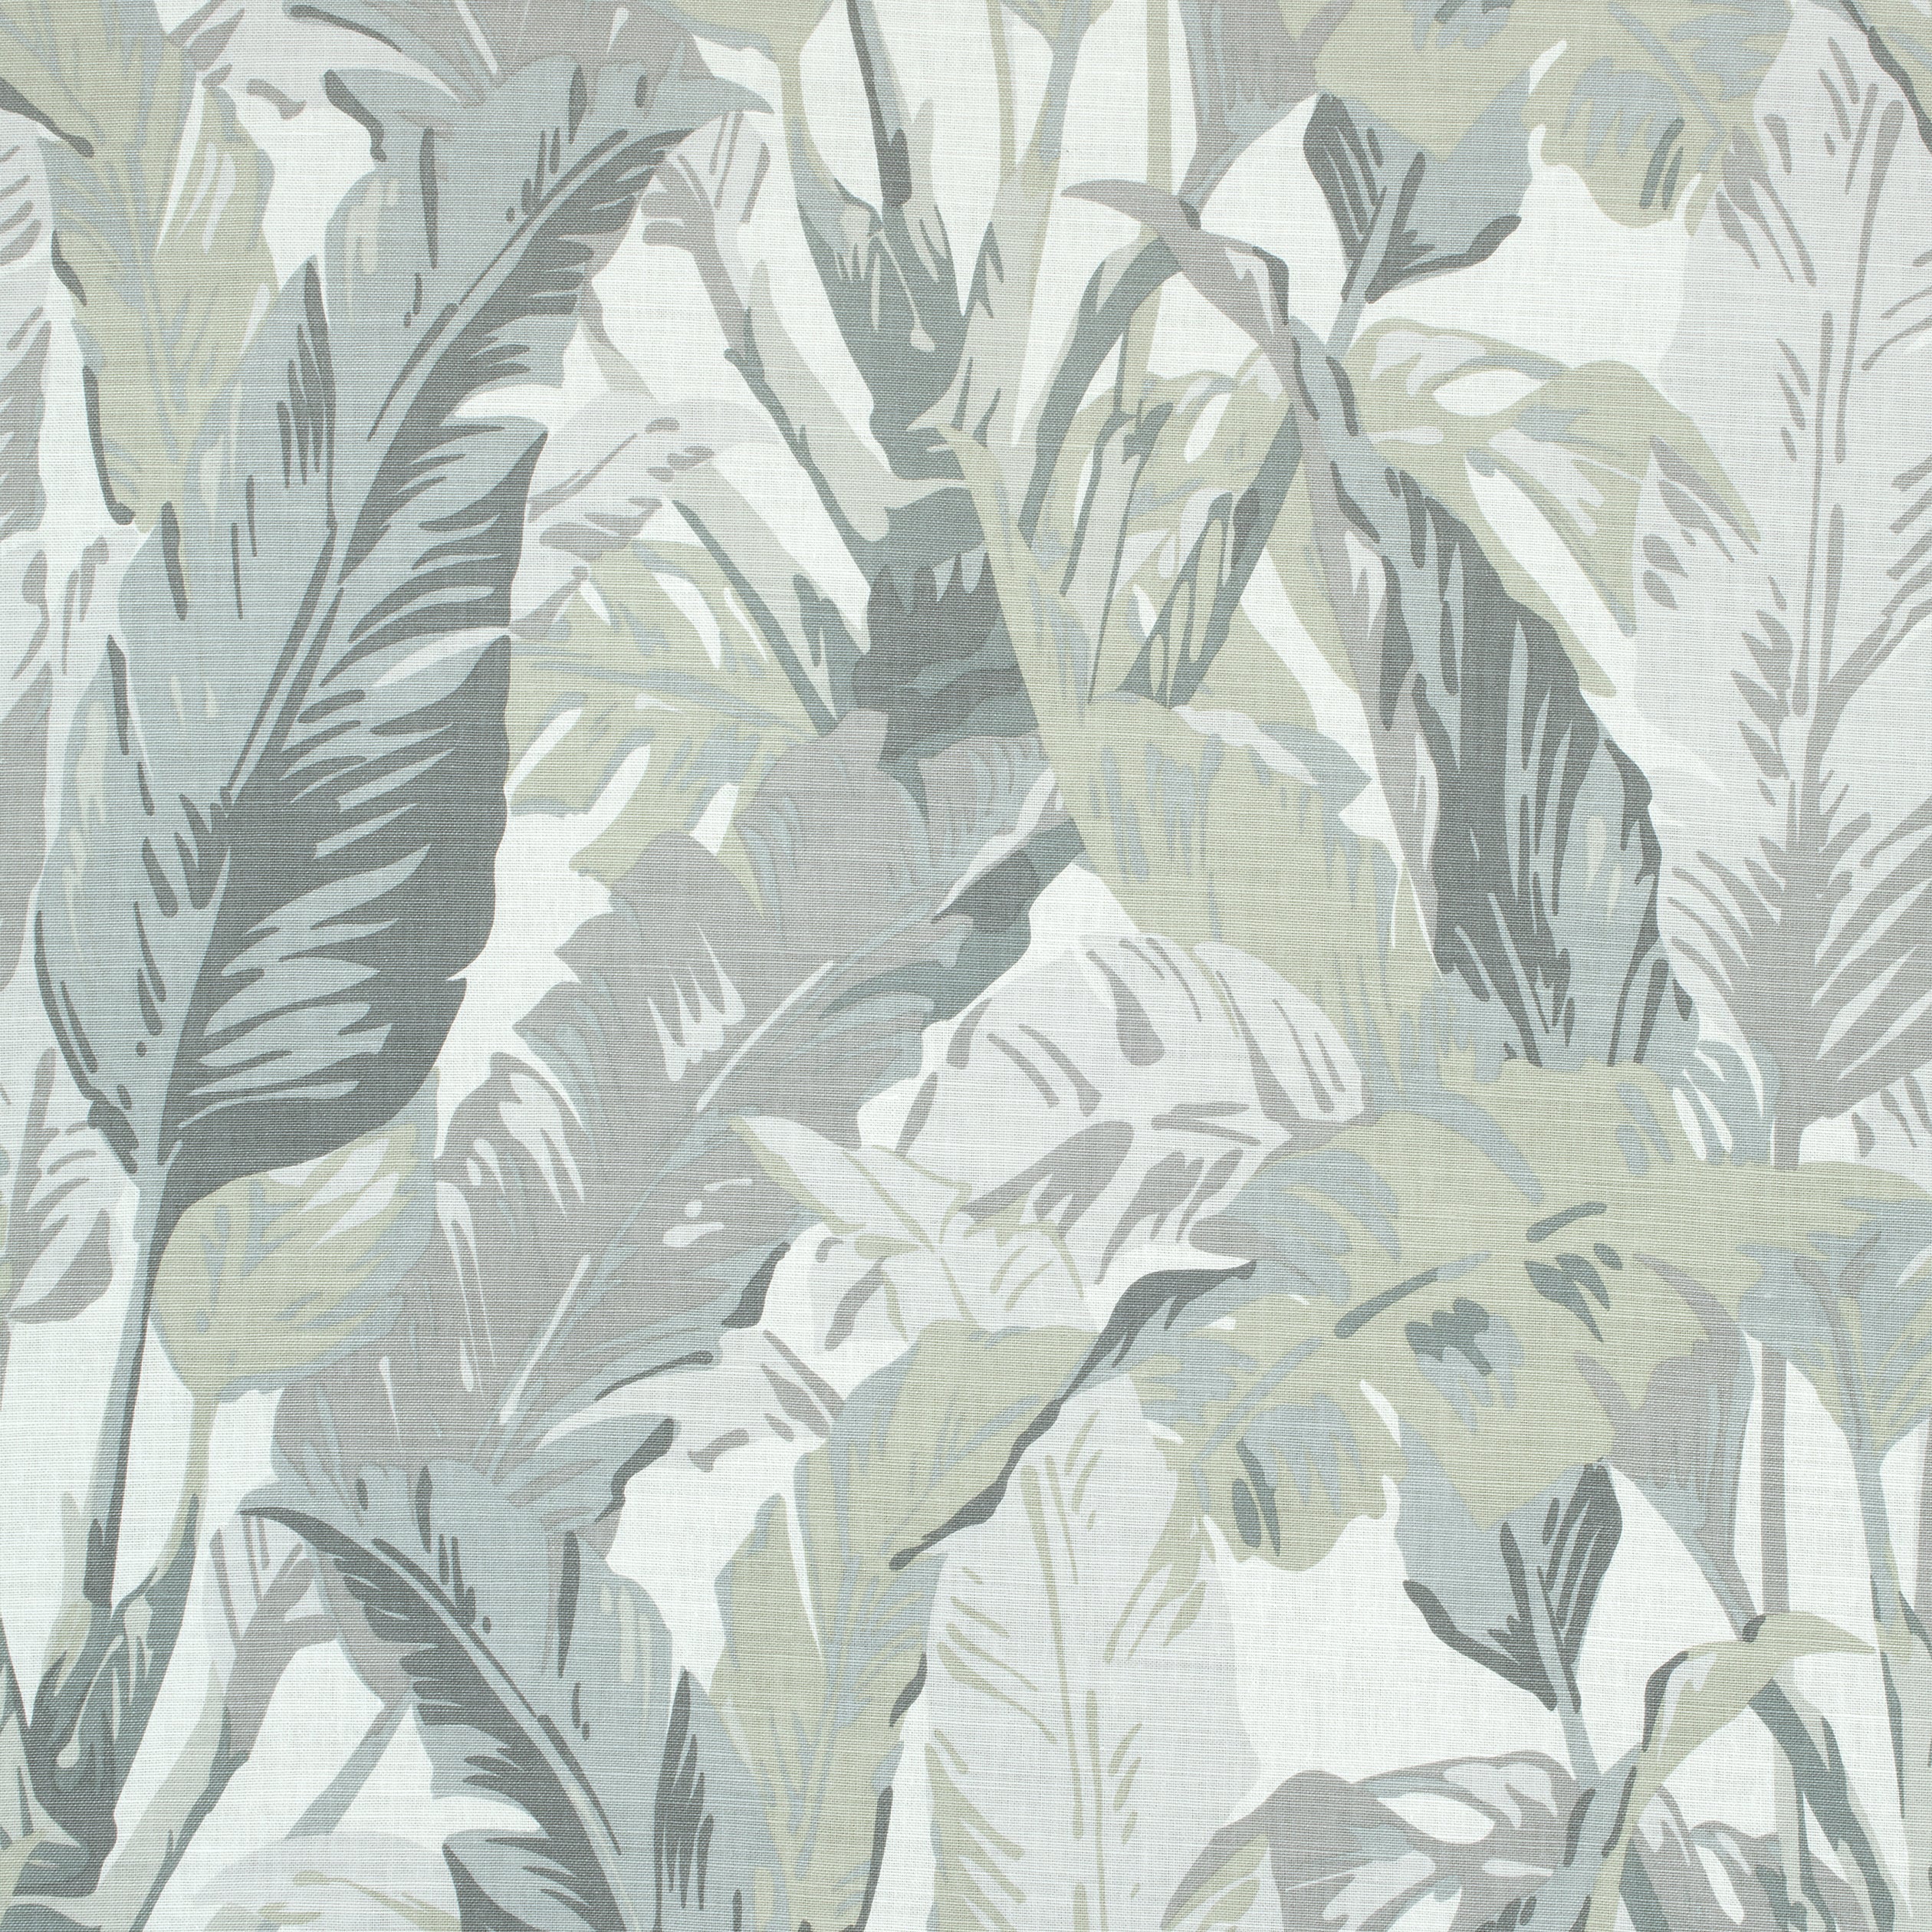 Travelers Palm fabric in grey color - pattern number F910129 - by Thibaut in the Tropics collection